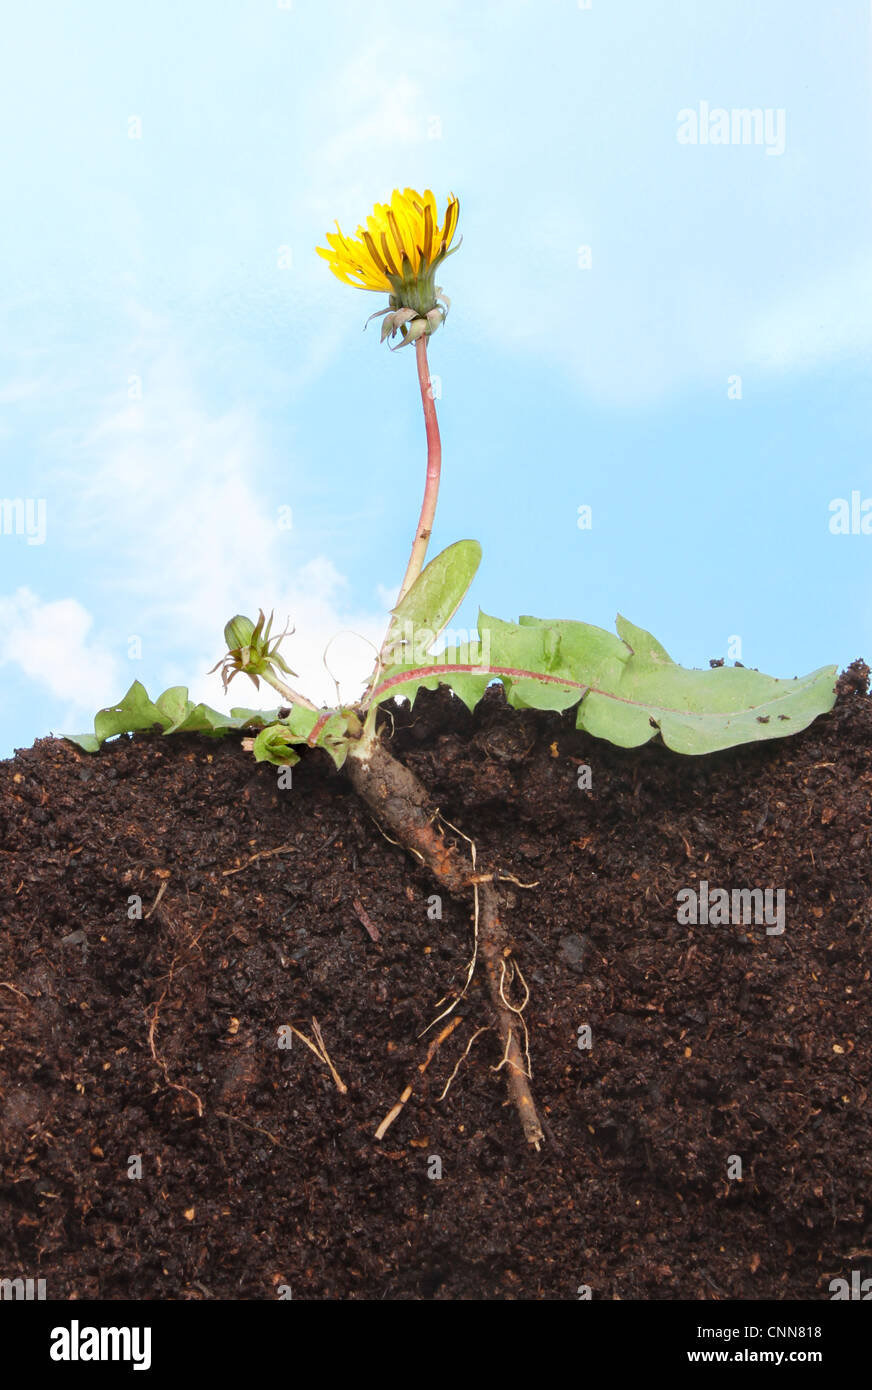 Section through a dandelion ,Taraxacum officinale, showing root structure leaves,flower and bud in soil against a blue sky Stock Photo